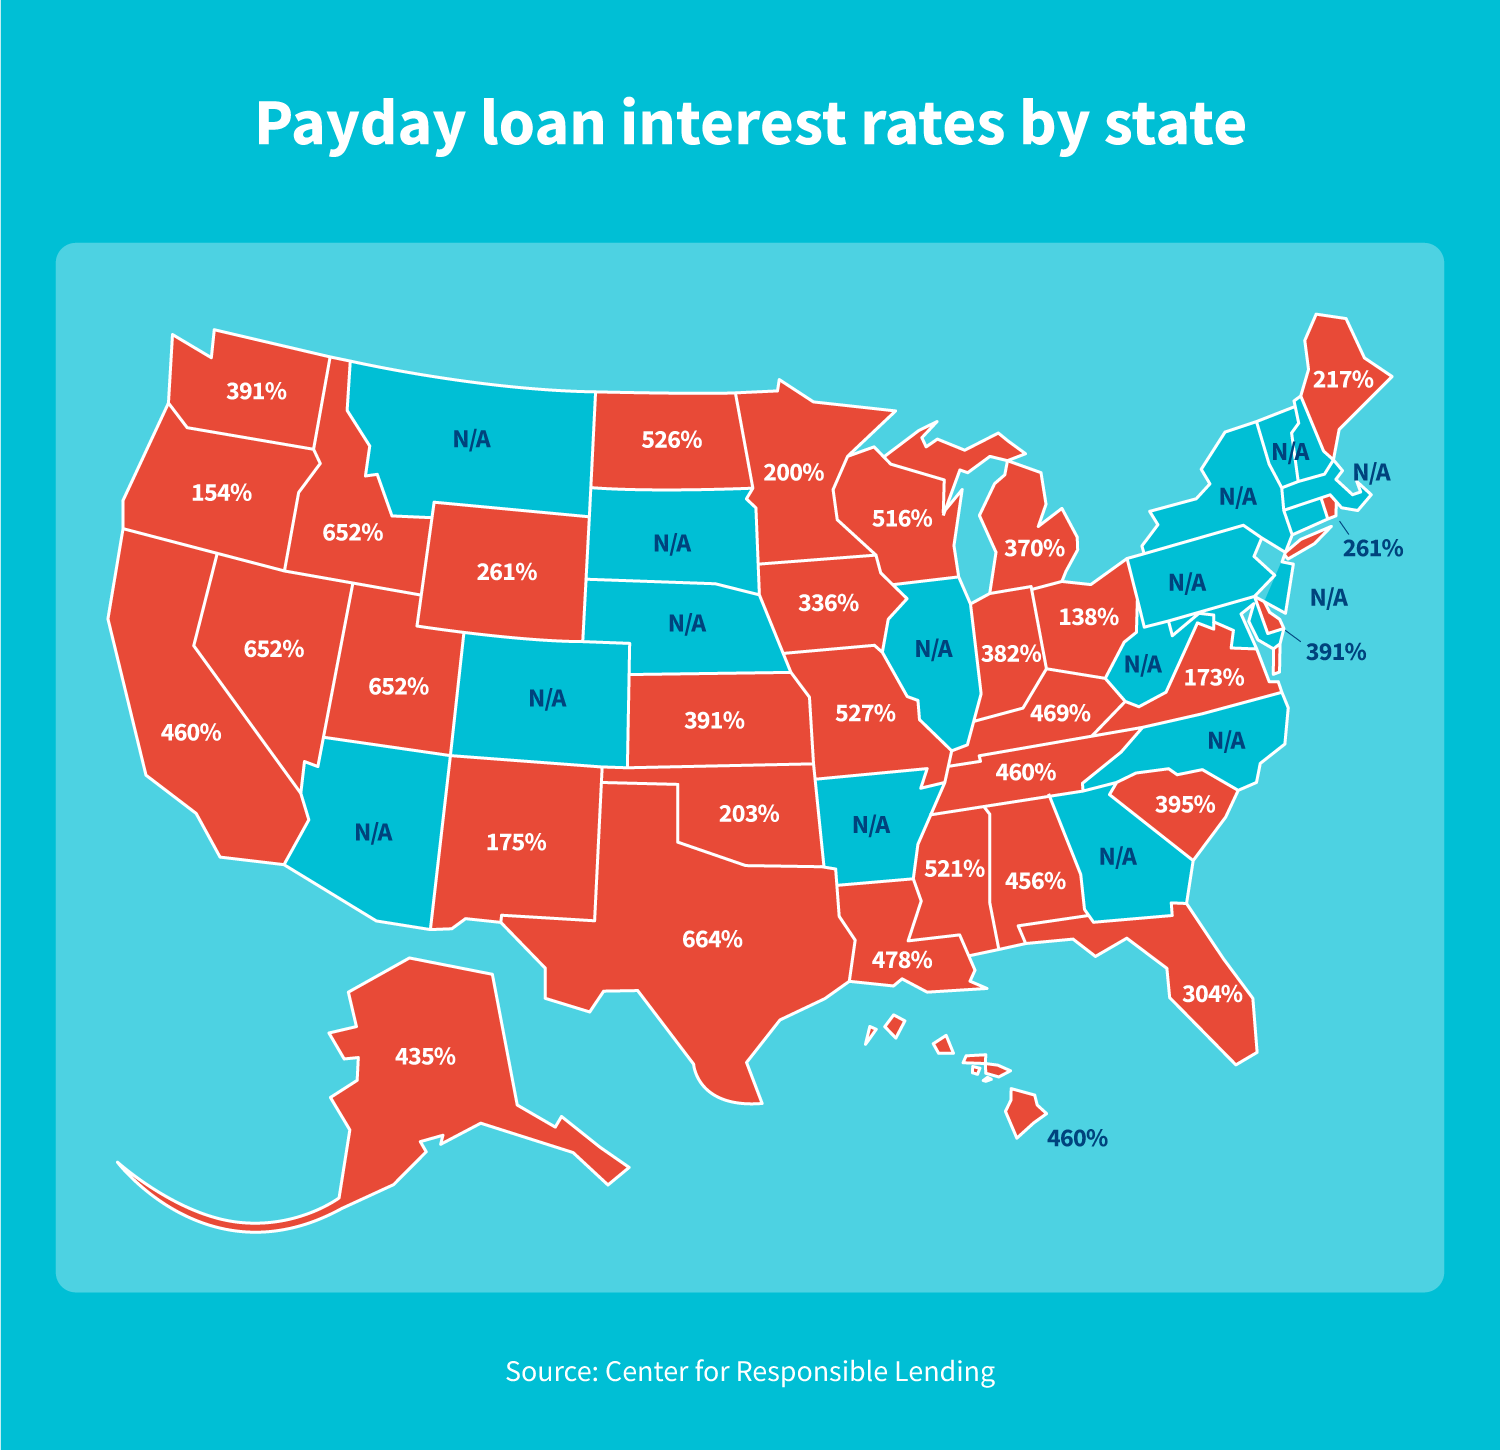 Payday loan interest rates by states